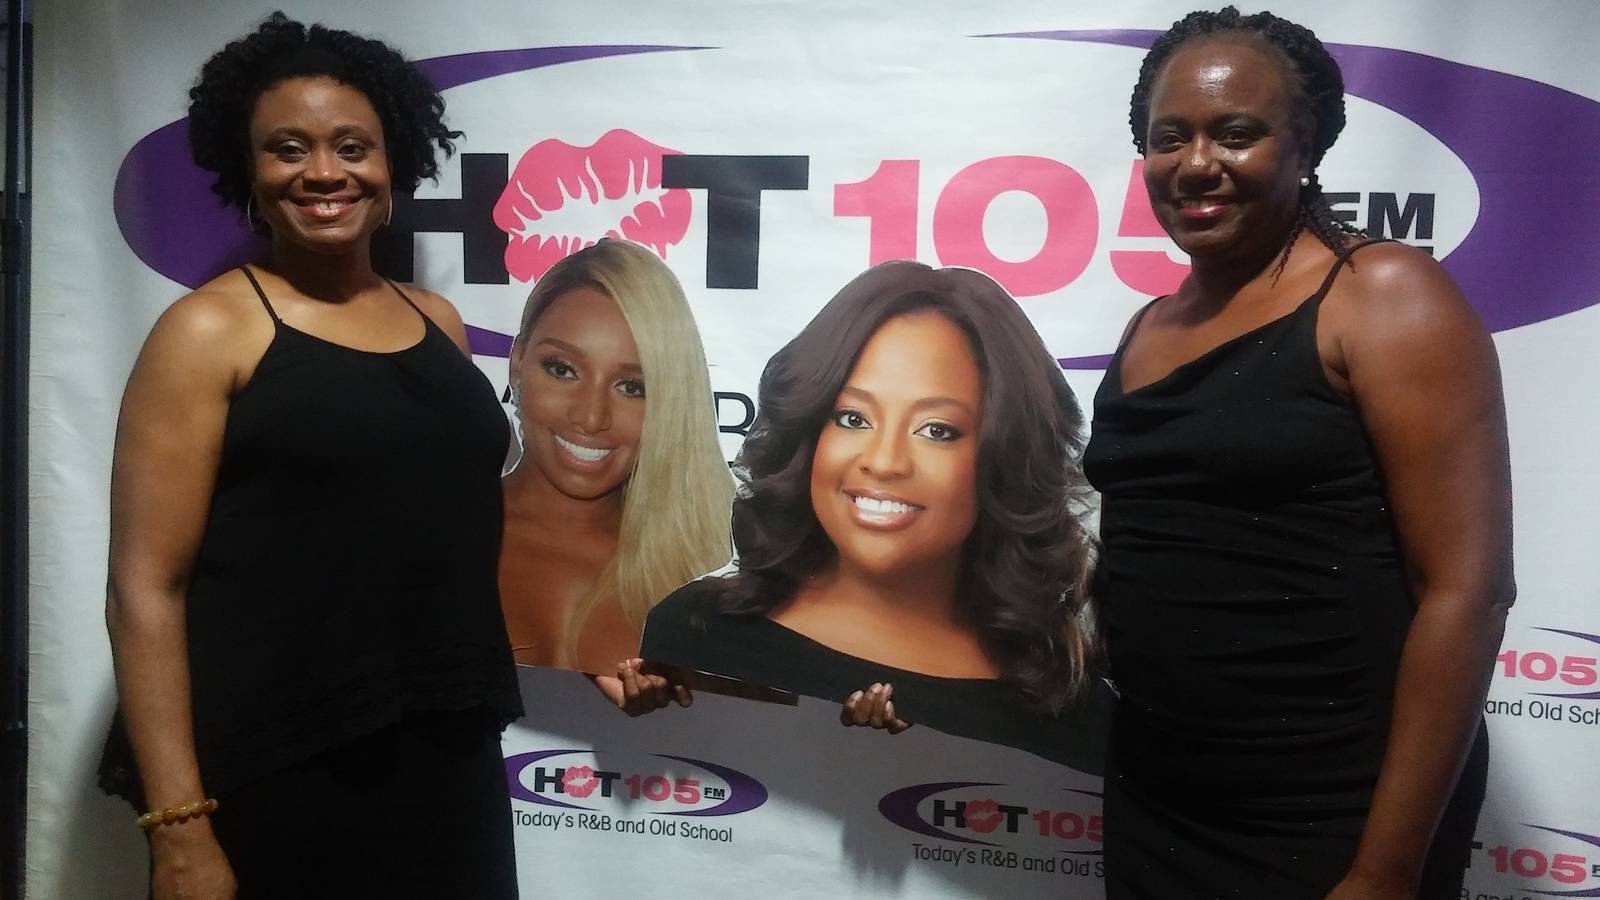 LADIES NIGHT OUT COMEDY TOUR HOT 105!